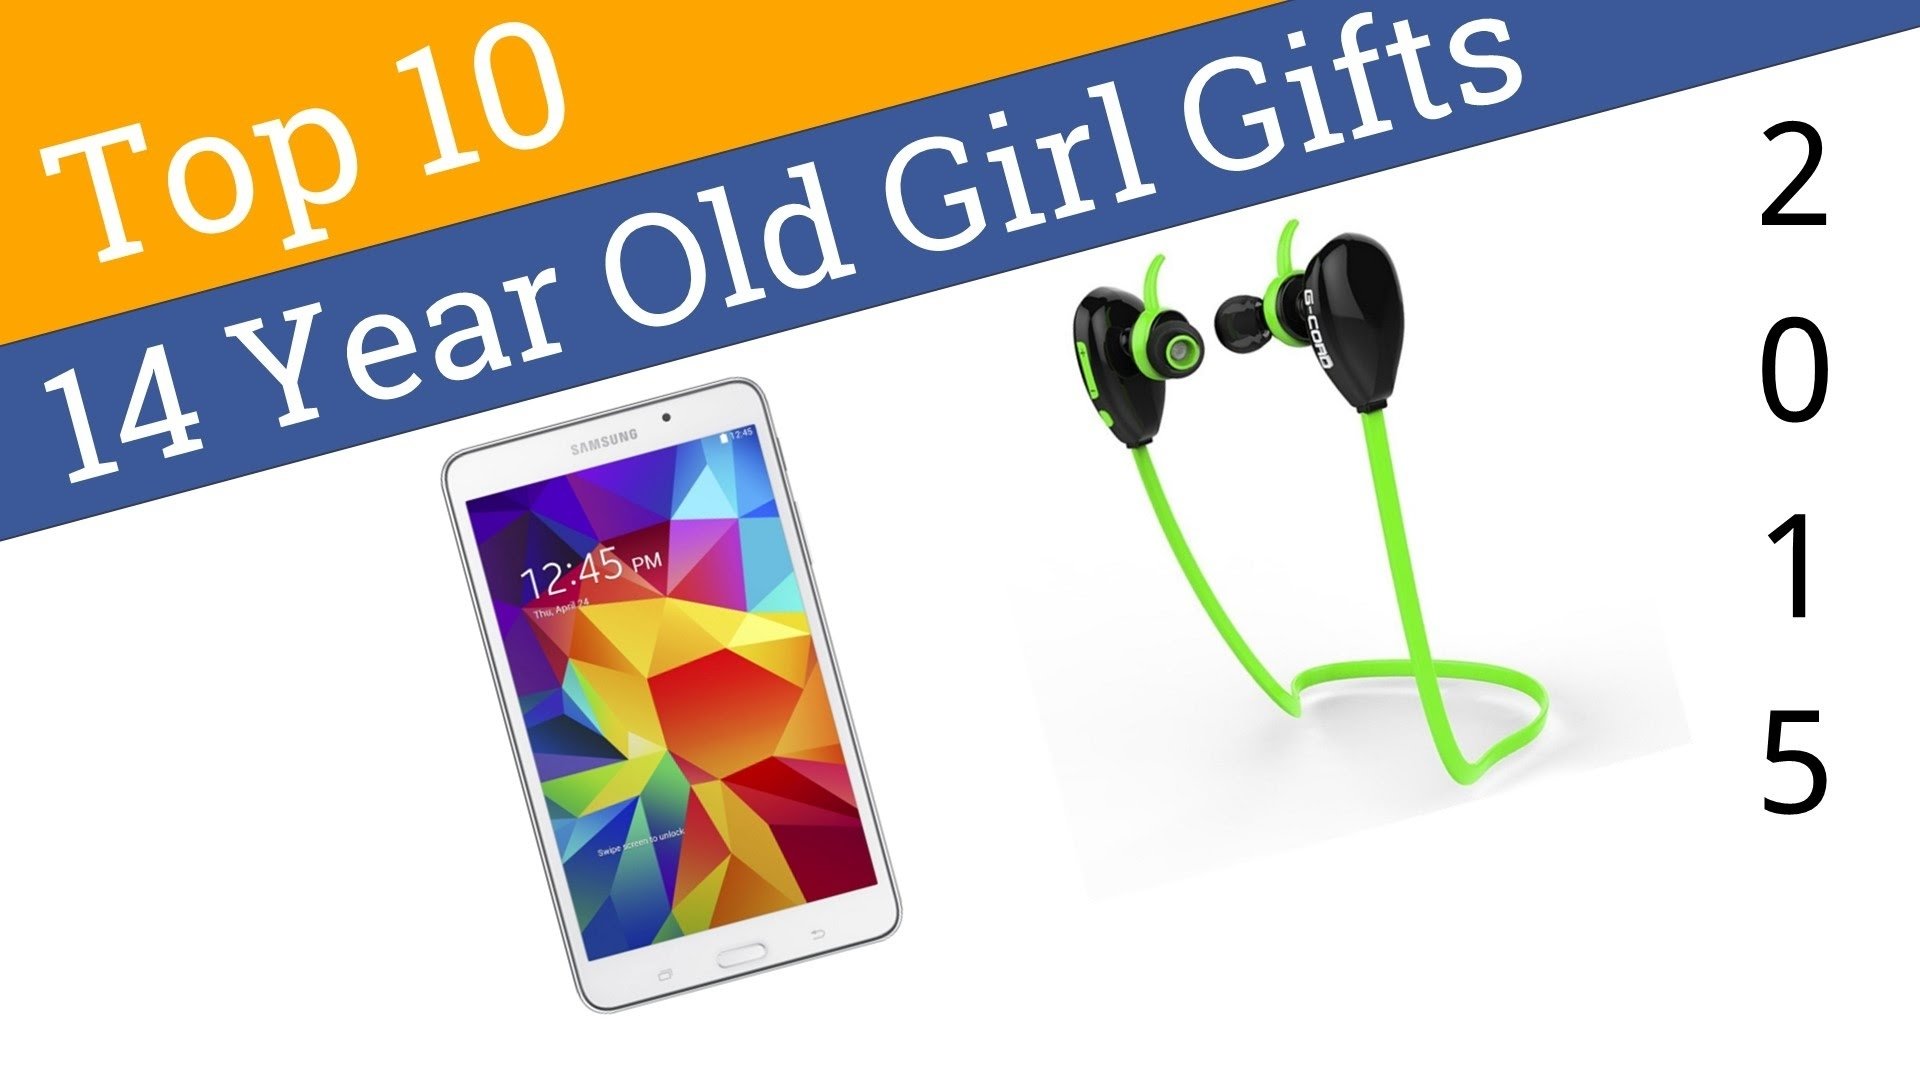 10 Elegant 14 Year Old Girl Gift Ideas 10 best 14 year old girl gifts 2015 youtube 2022